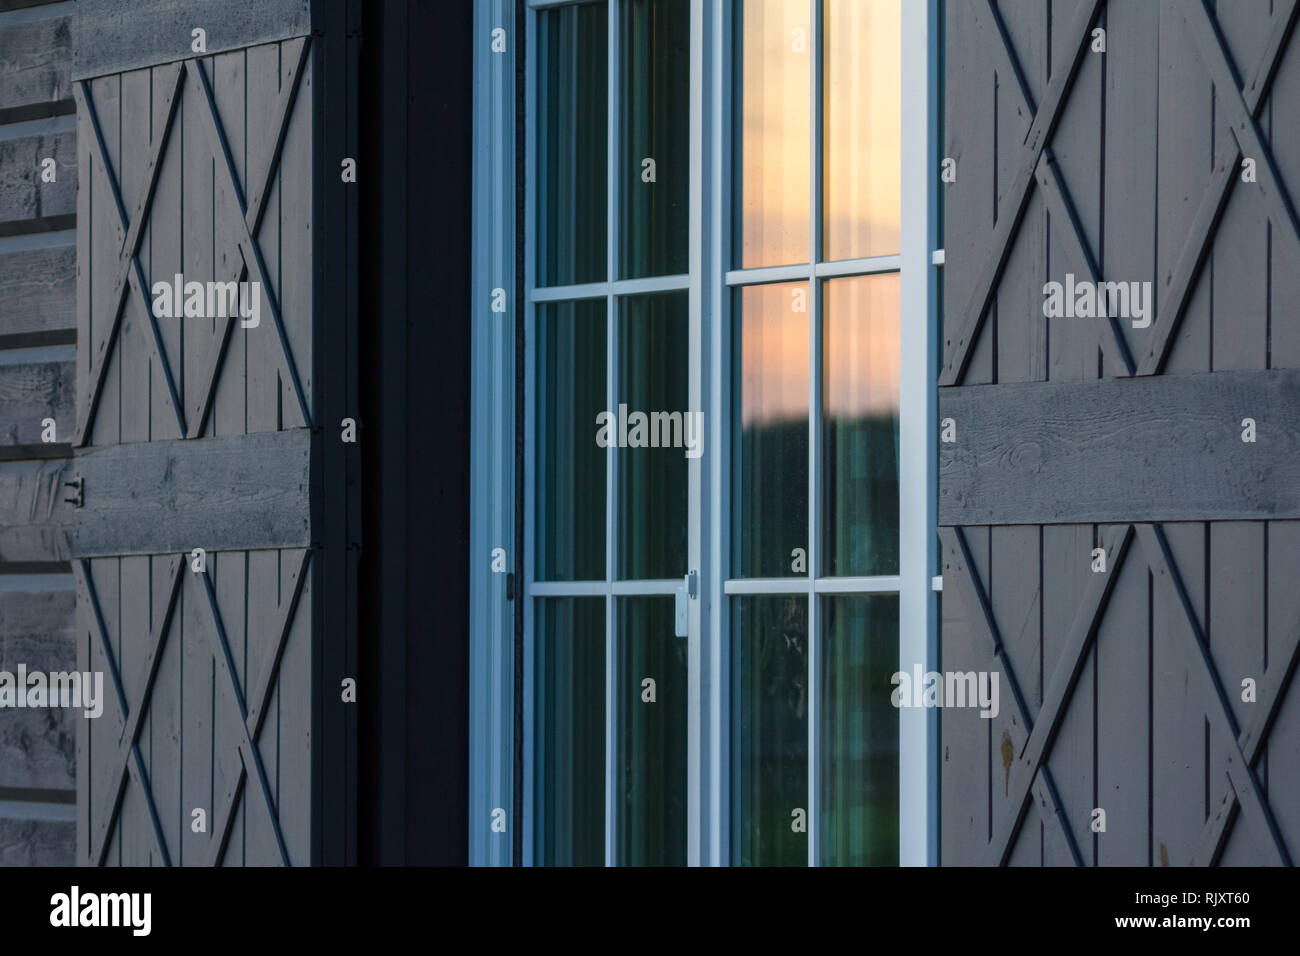 Detail of wooden home exterior. Warm evening light reflection on glass windows. Stock Photo